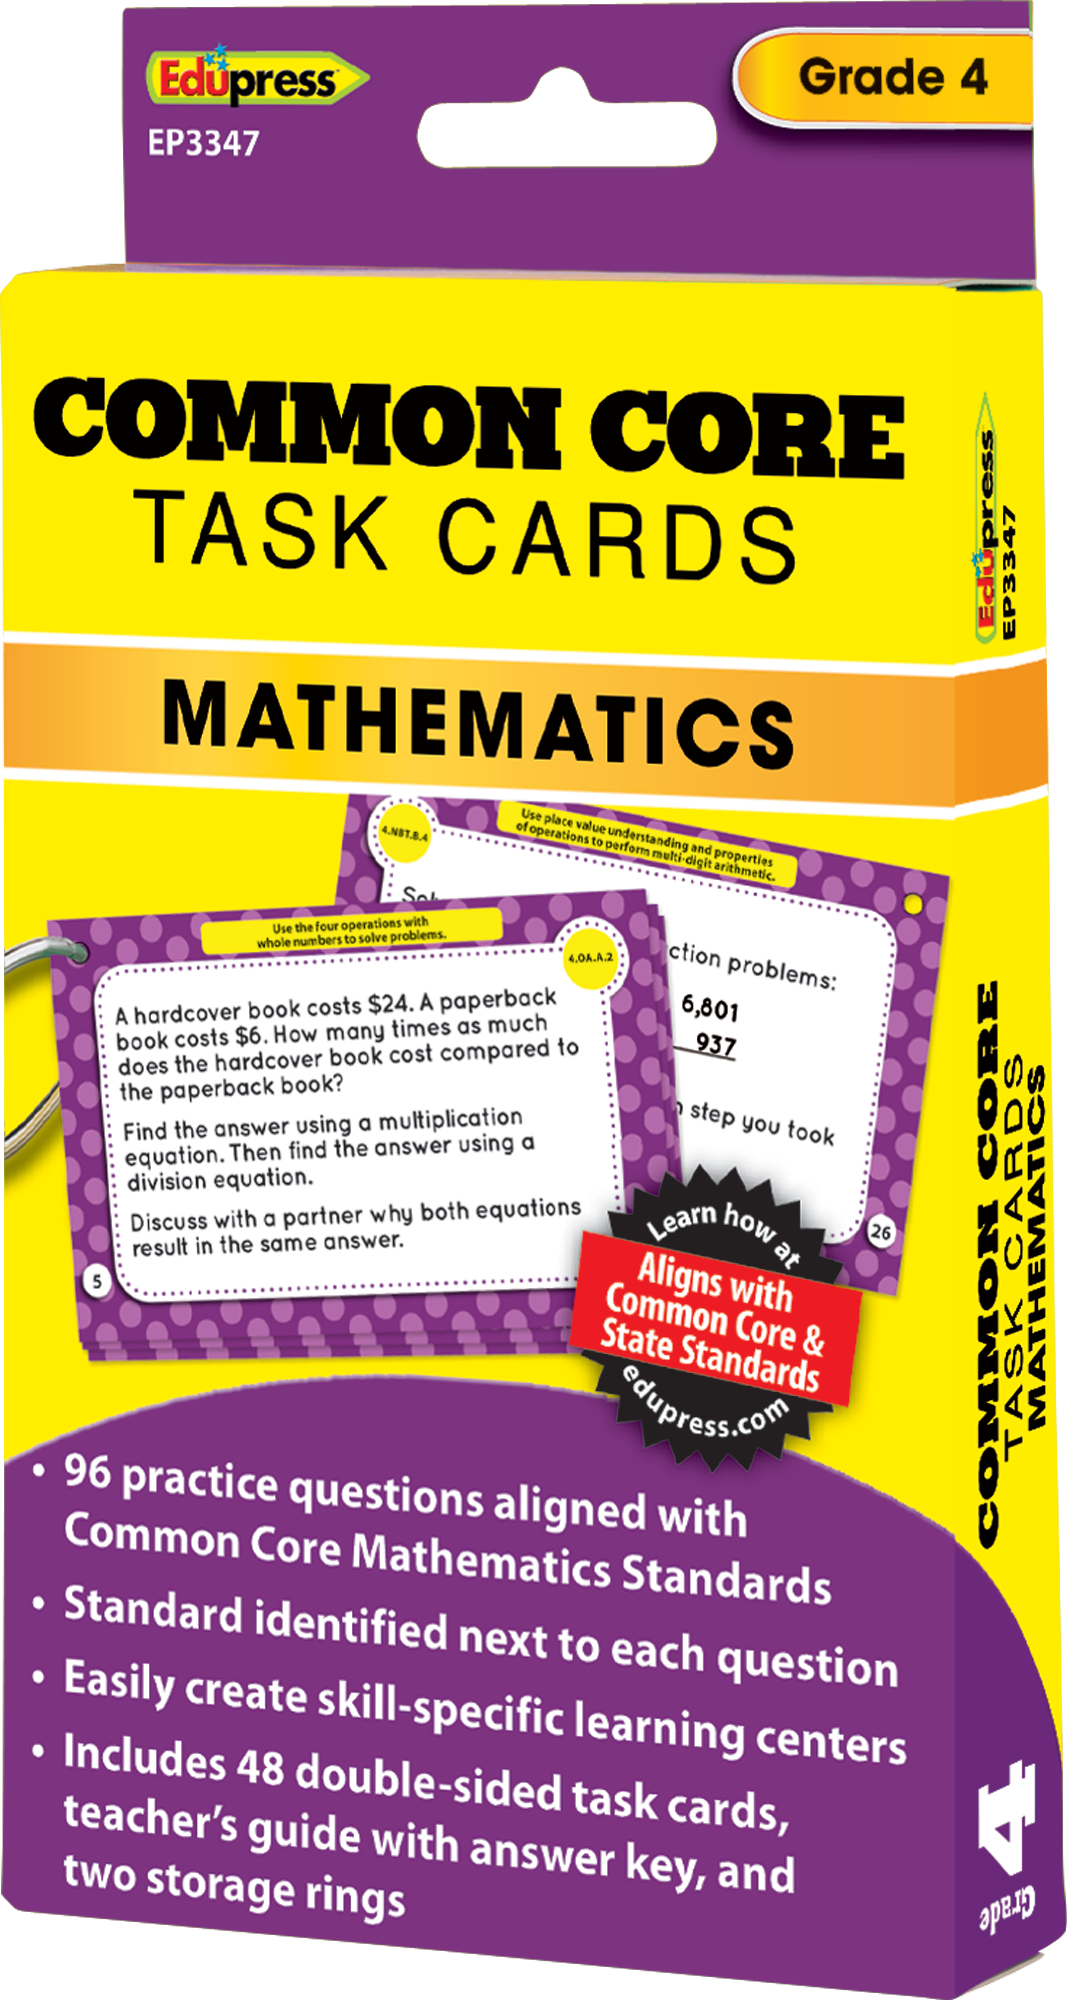 Common Core Math Facts Worksheets